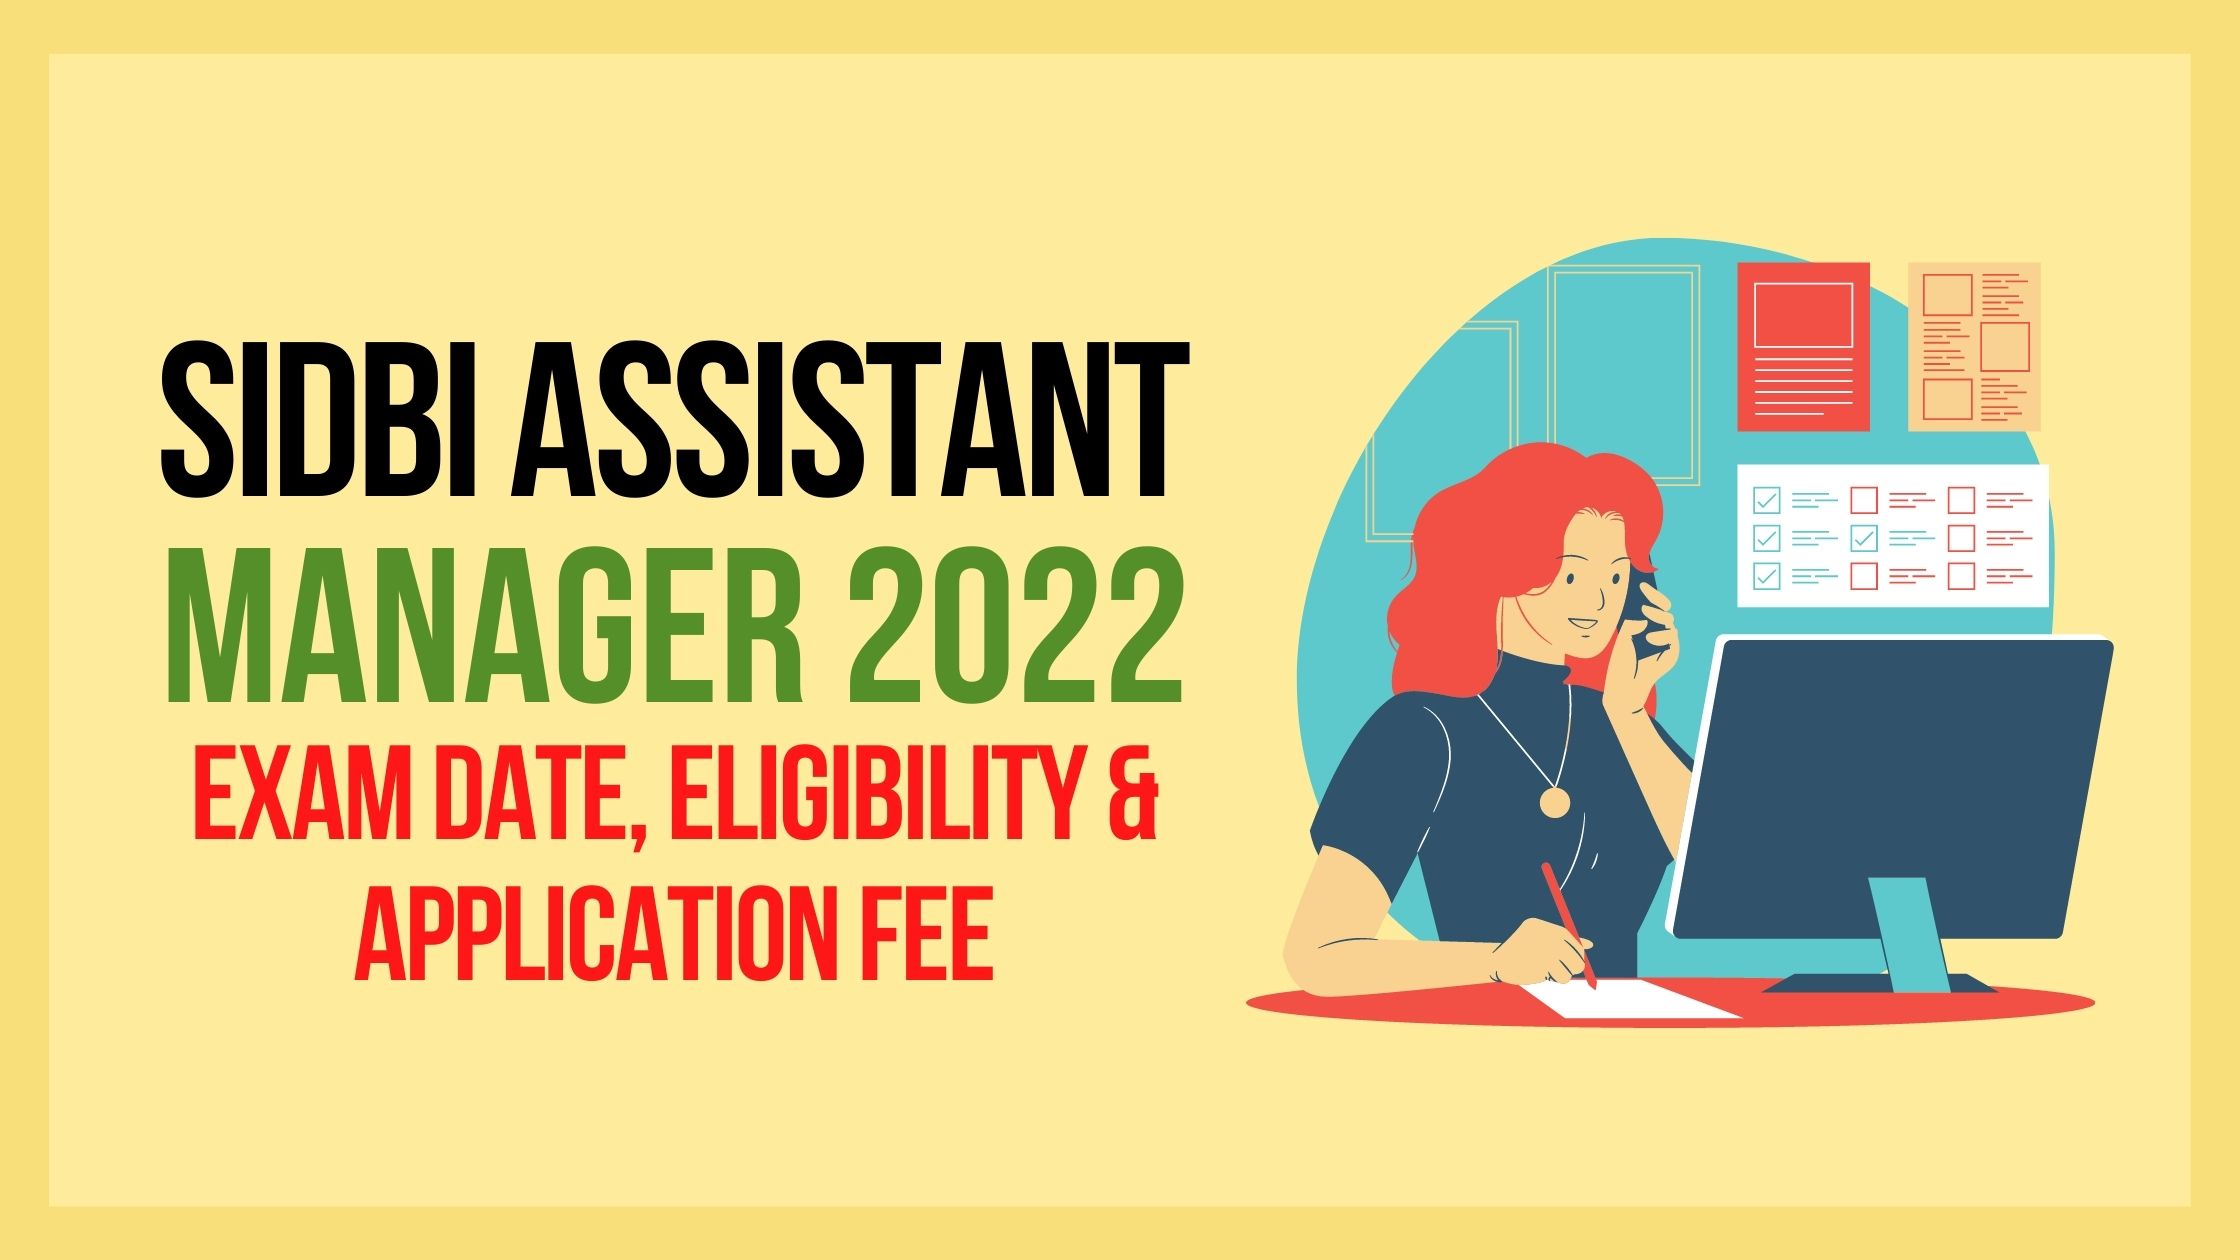 You are currently viewing SIDBI Assistant Manager Recruitment 2022: Exam Date, Eligibility & Application Fee